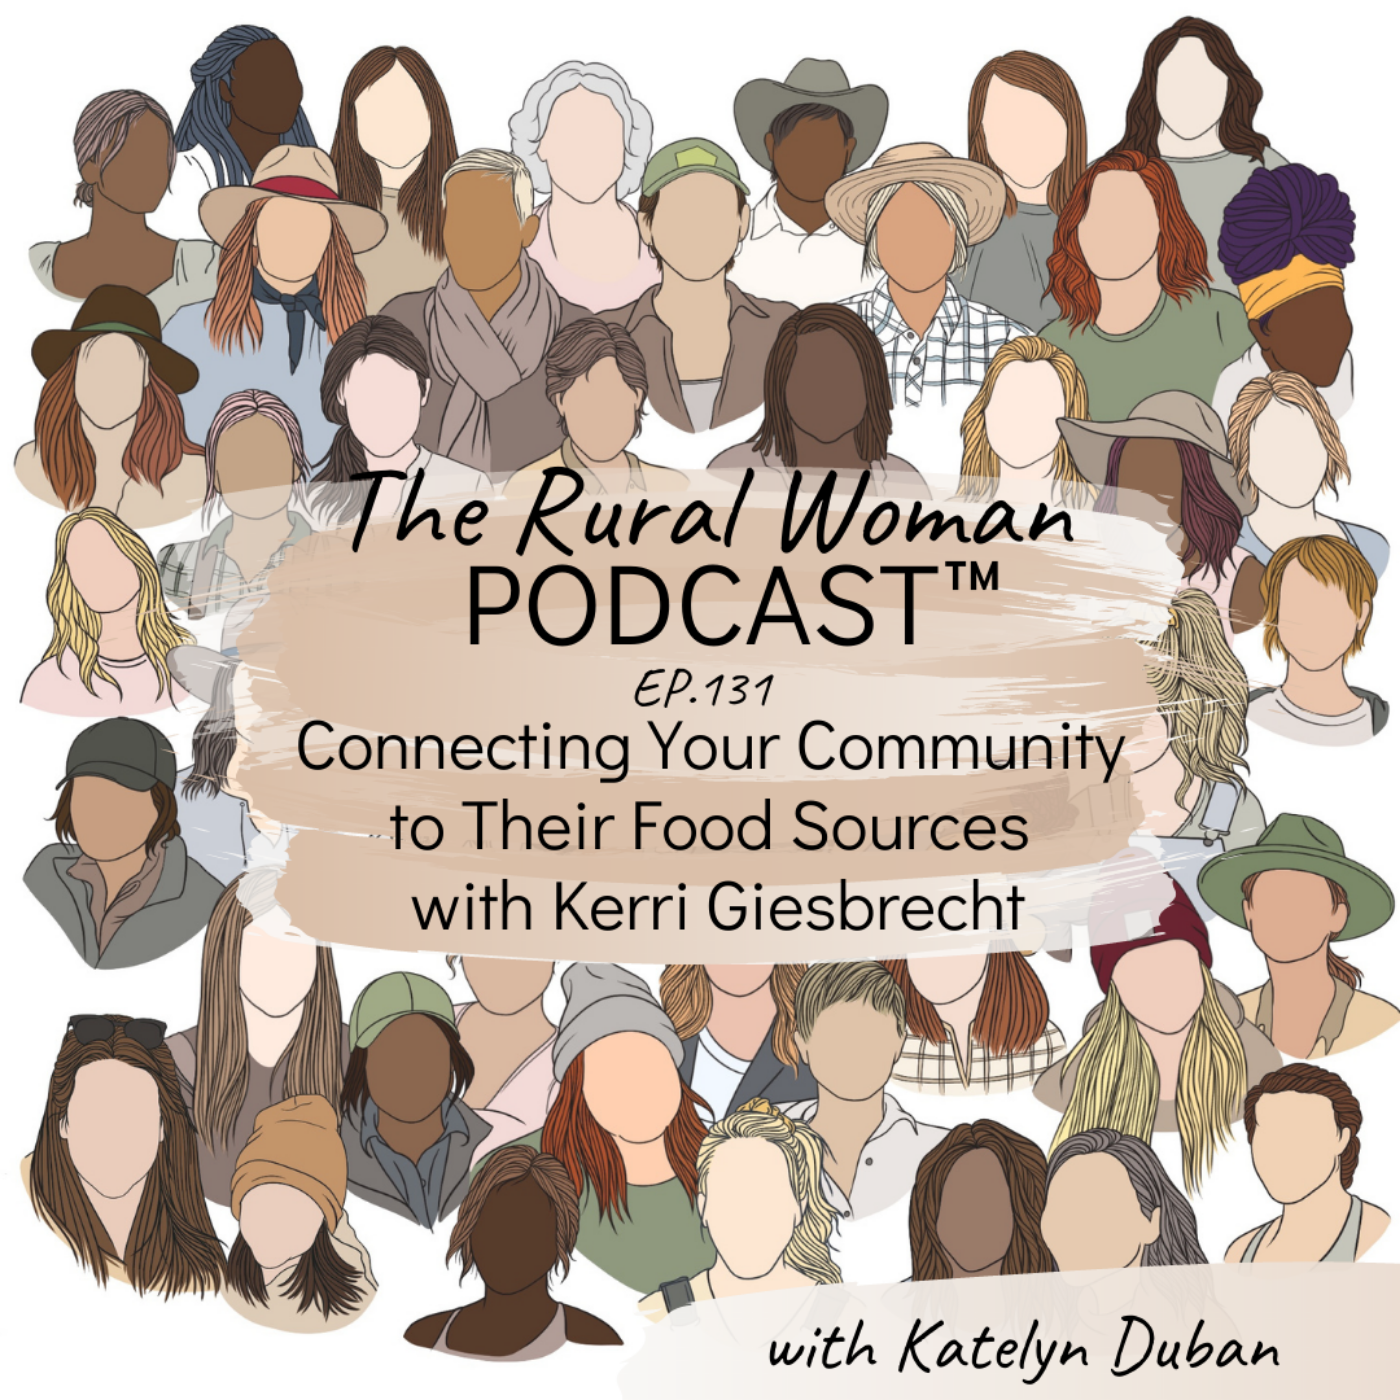 Artwork for podcast The Rural Woman Podcast